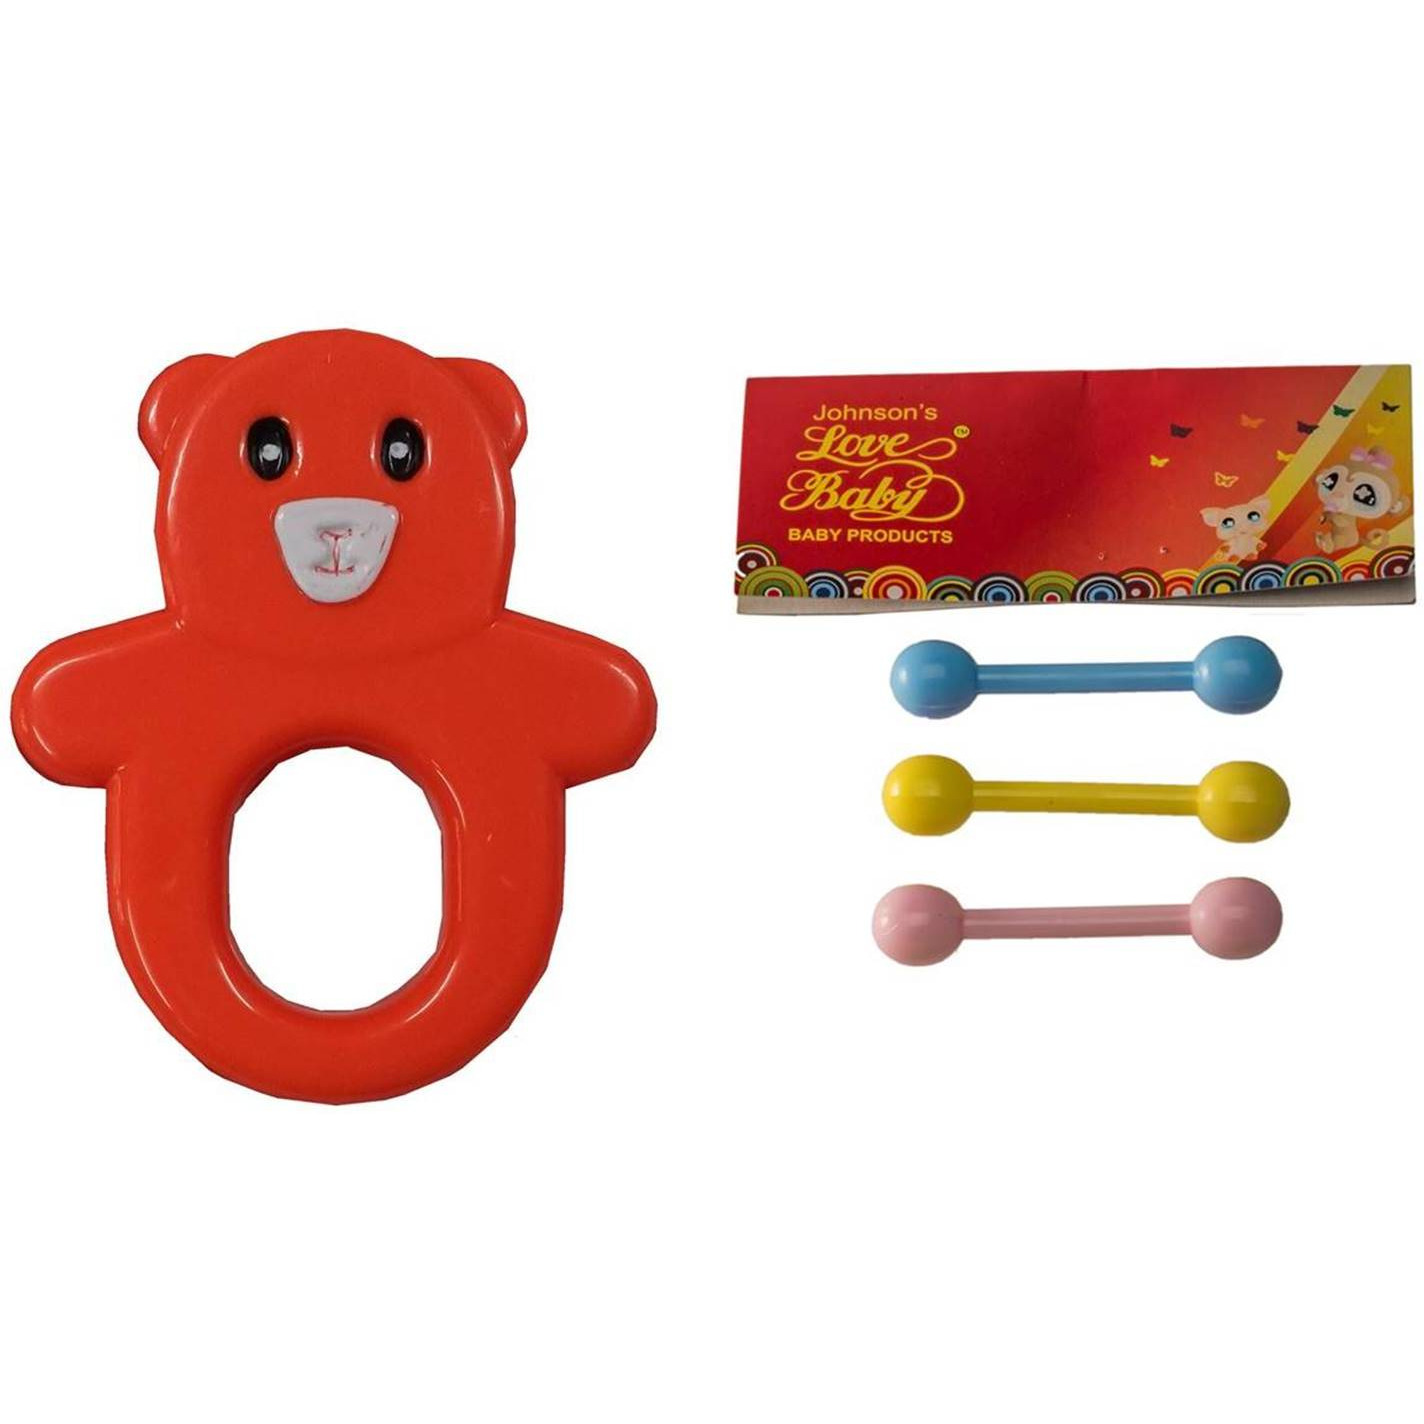 Auto Flow Rattle Toy - Guddu Toy - BT24 Combo Red